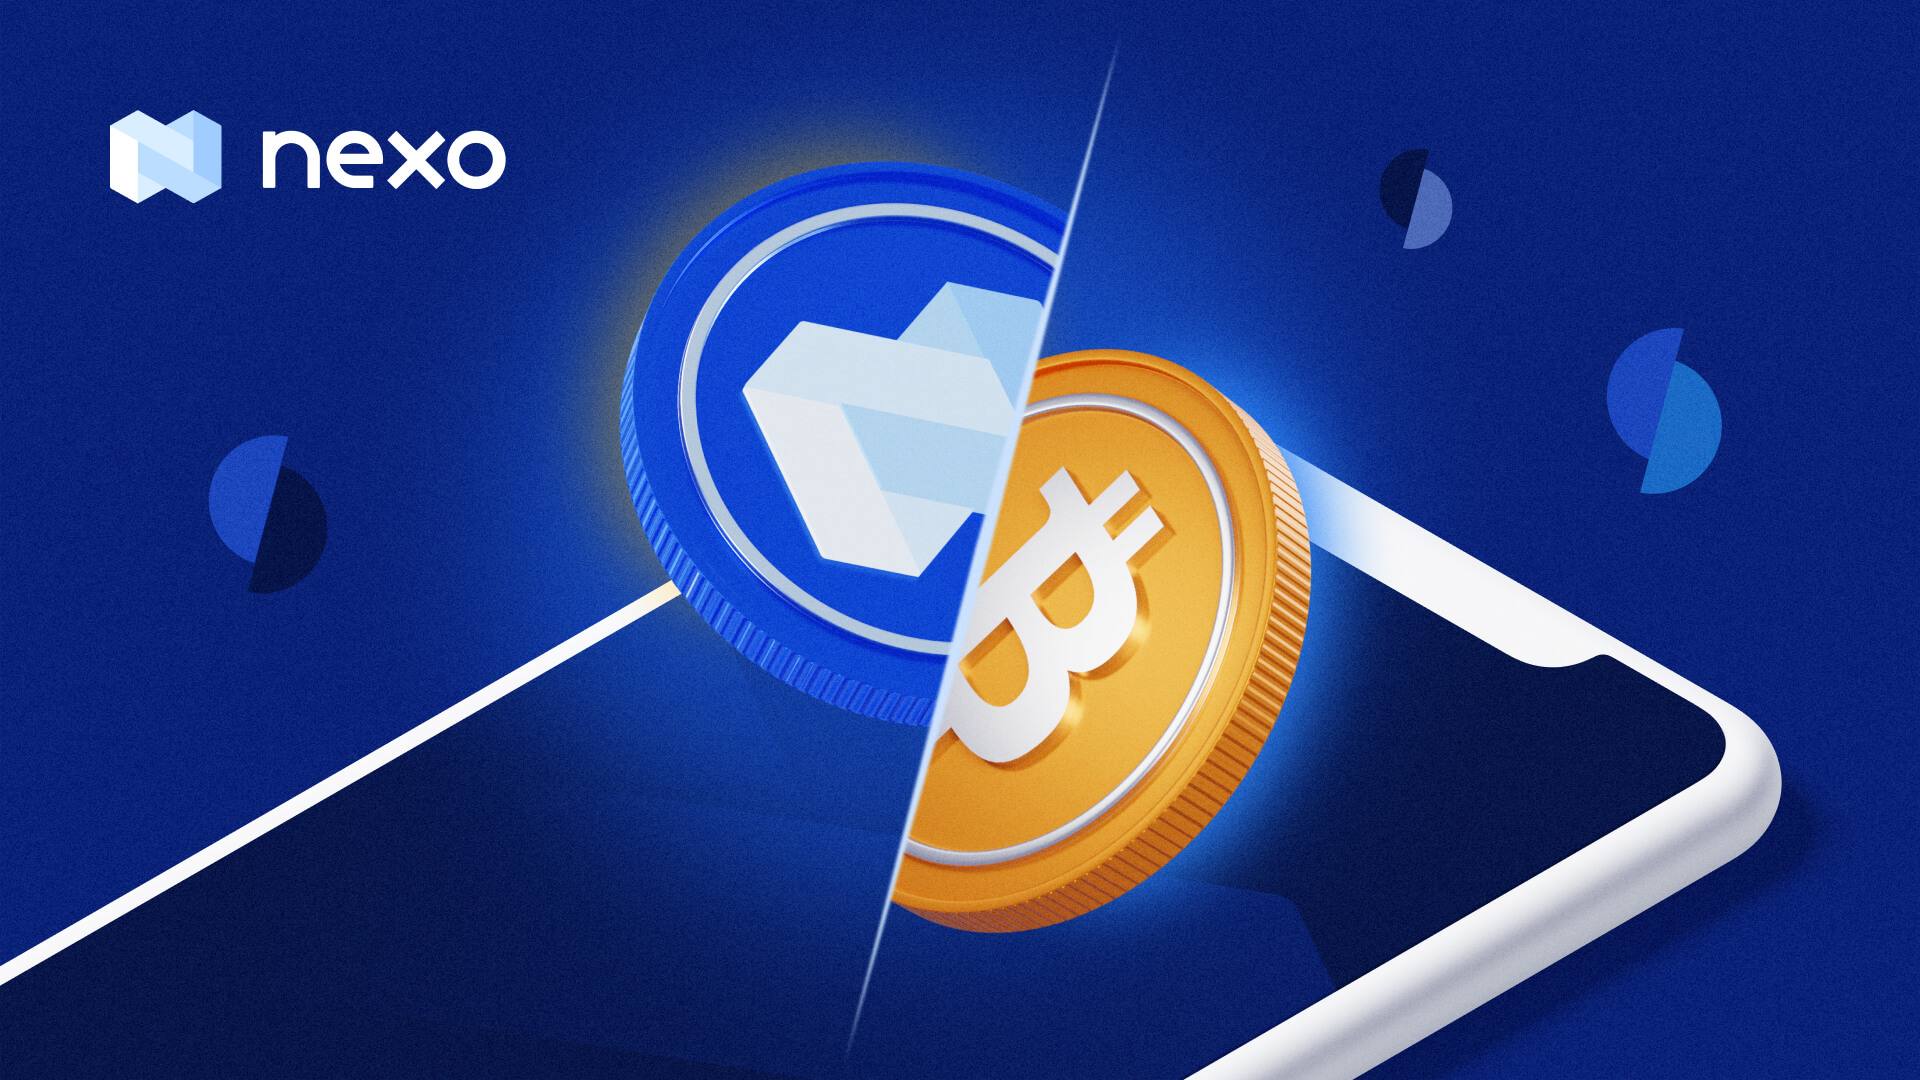 The Five Ws and How of the Nexo Exchange